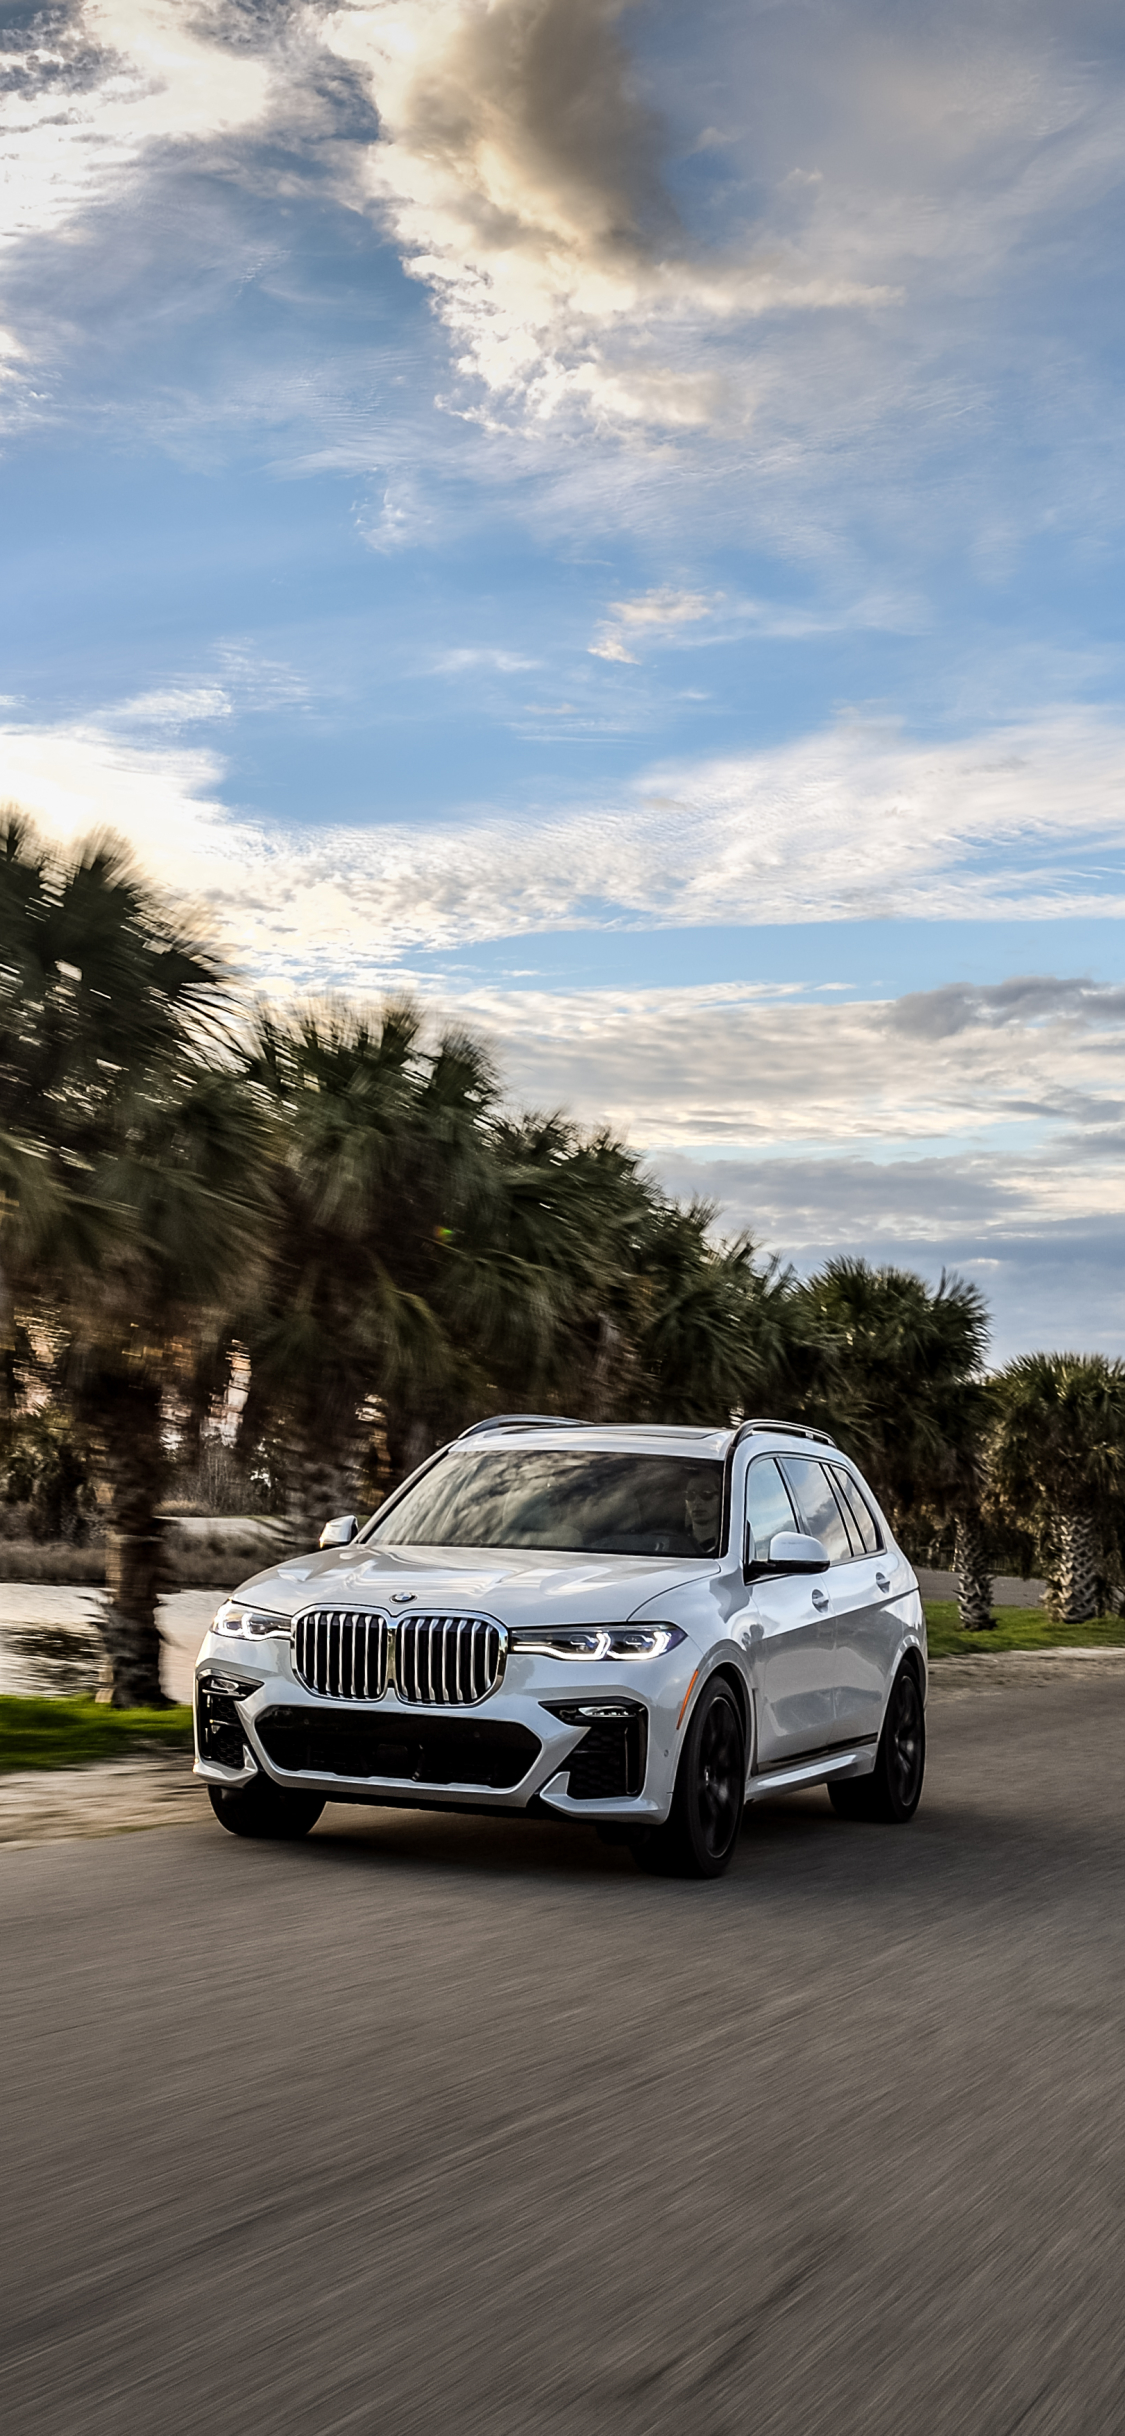 Bmw X7 Iphone X Android 車壁紙 1125 2436 Iphoneチーズ